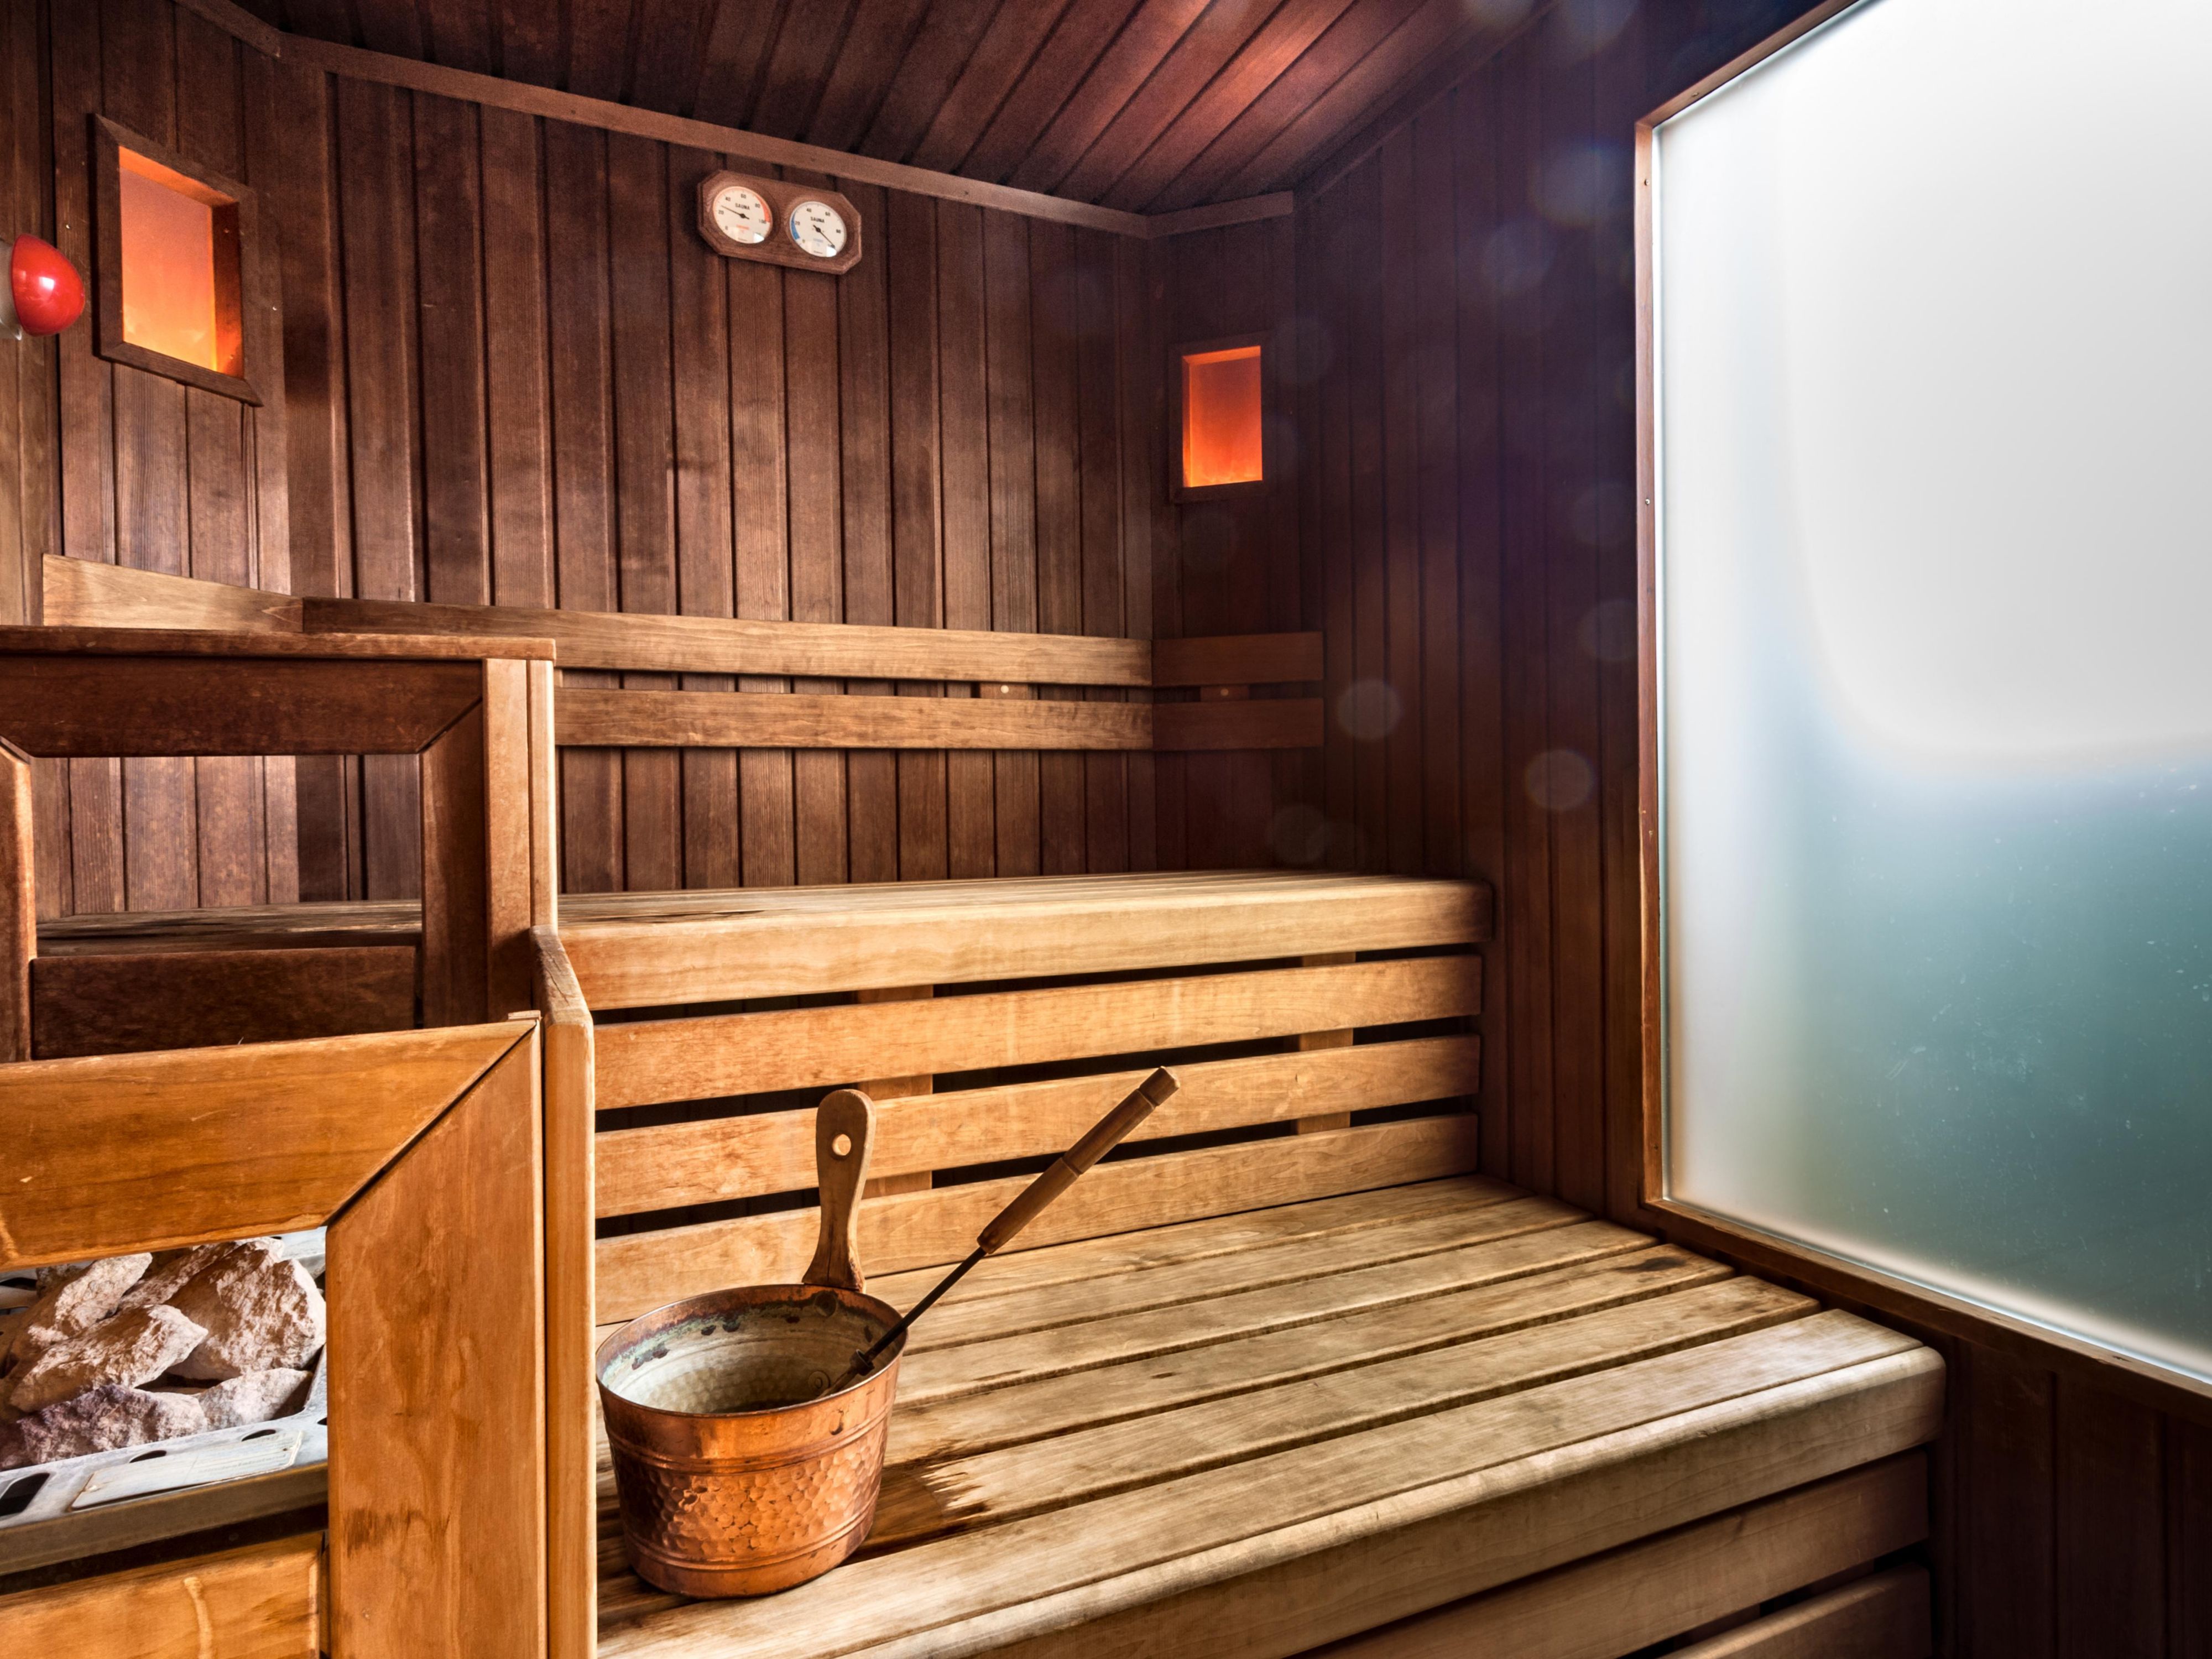 Indulge yourself with a relaxing sauna or Turkish bath in the wellness area on the 9th floor with breathtaking views. And for fitness lovers, there is also a fitness corner in the same area. All services are complimentary to all Guests.